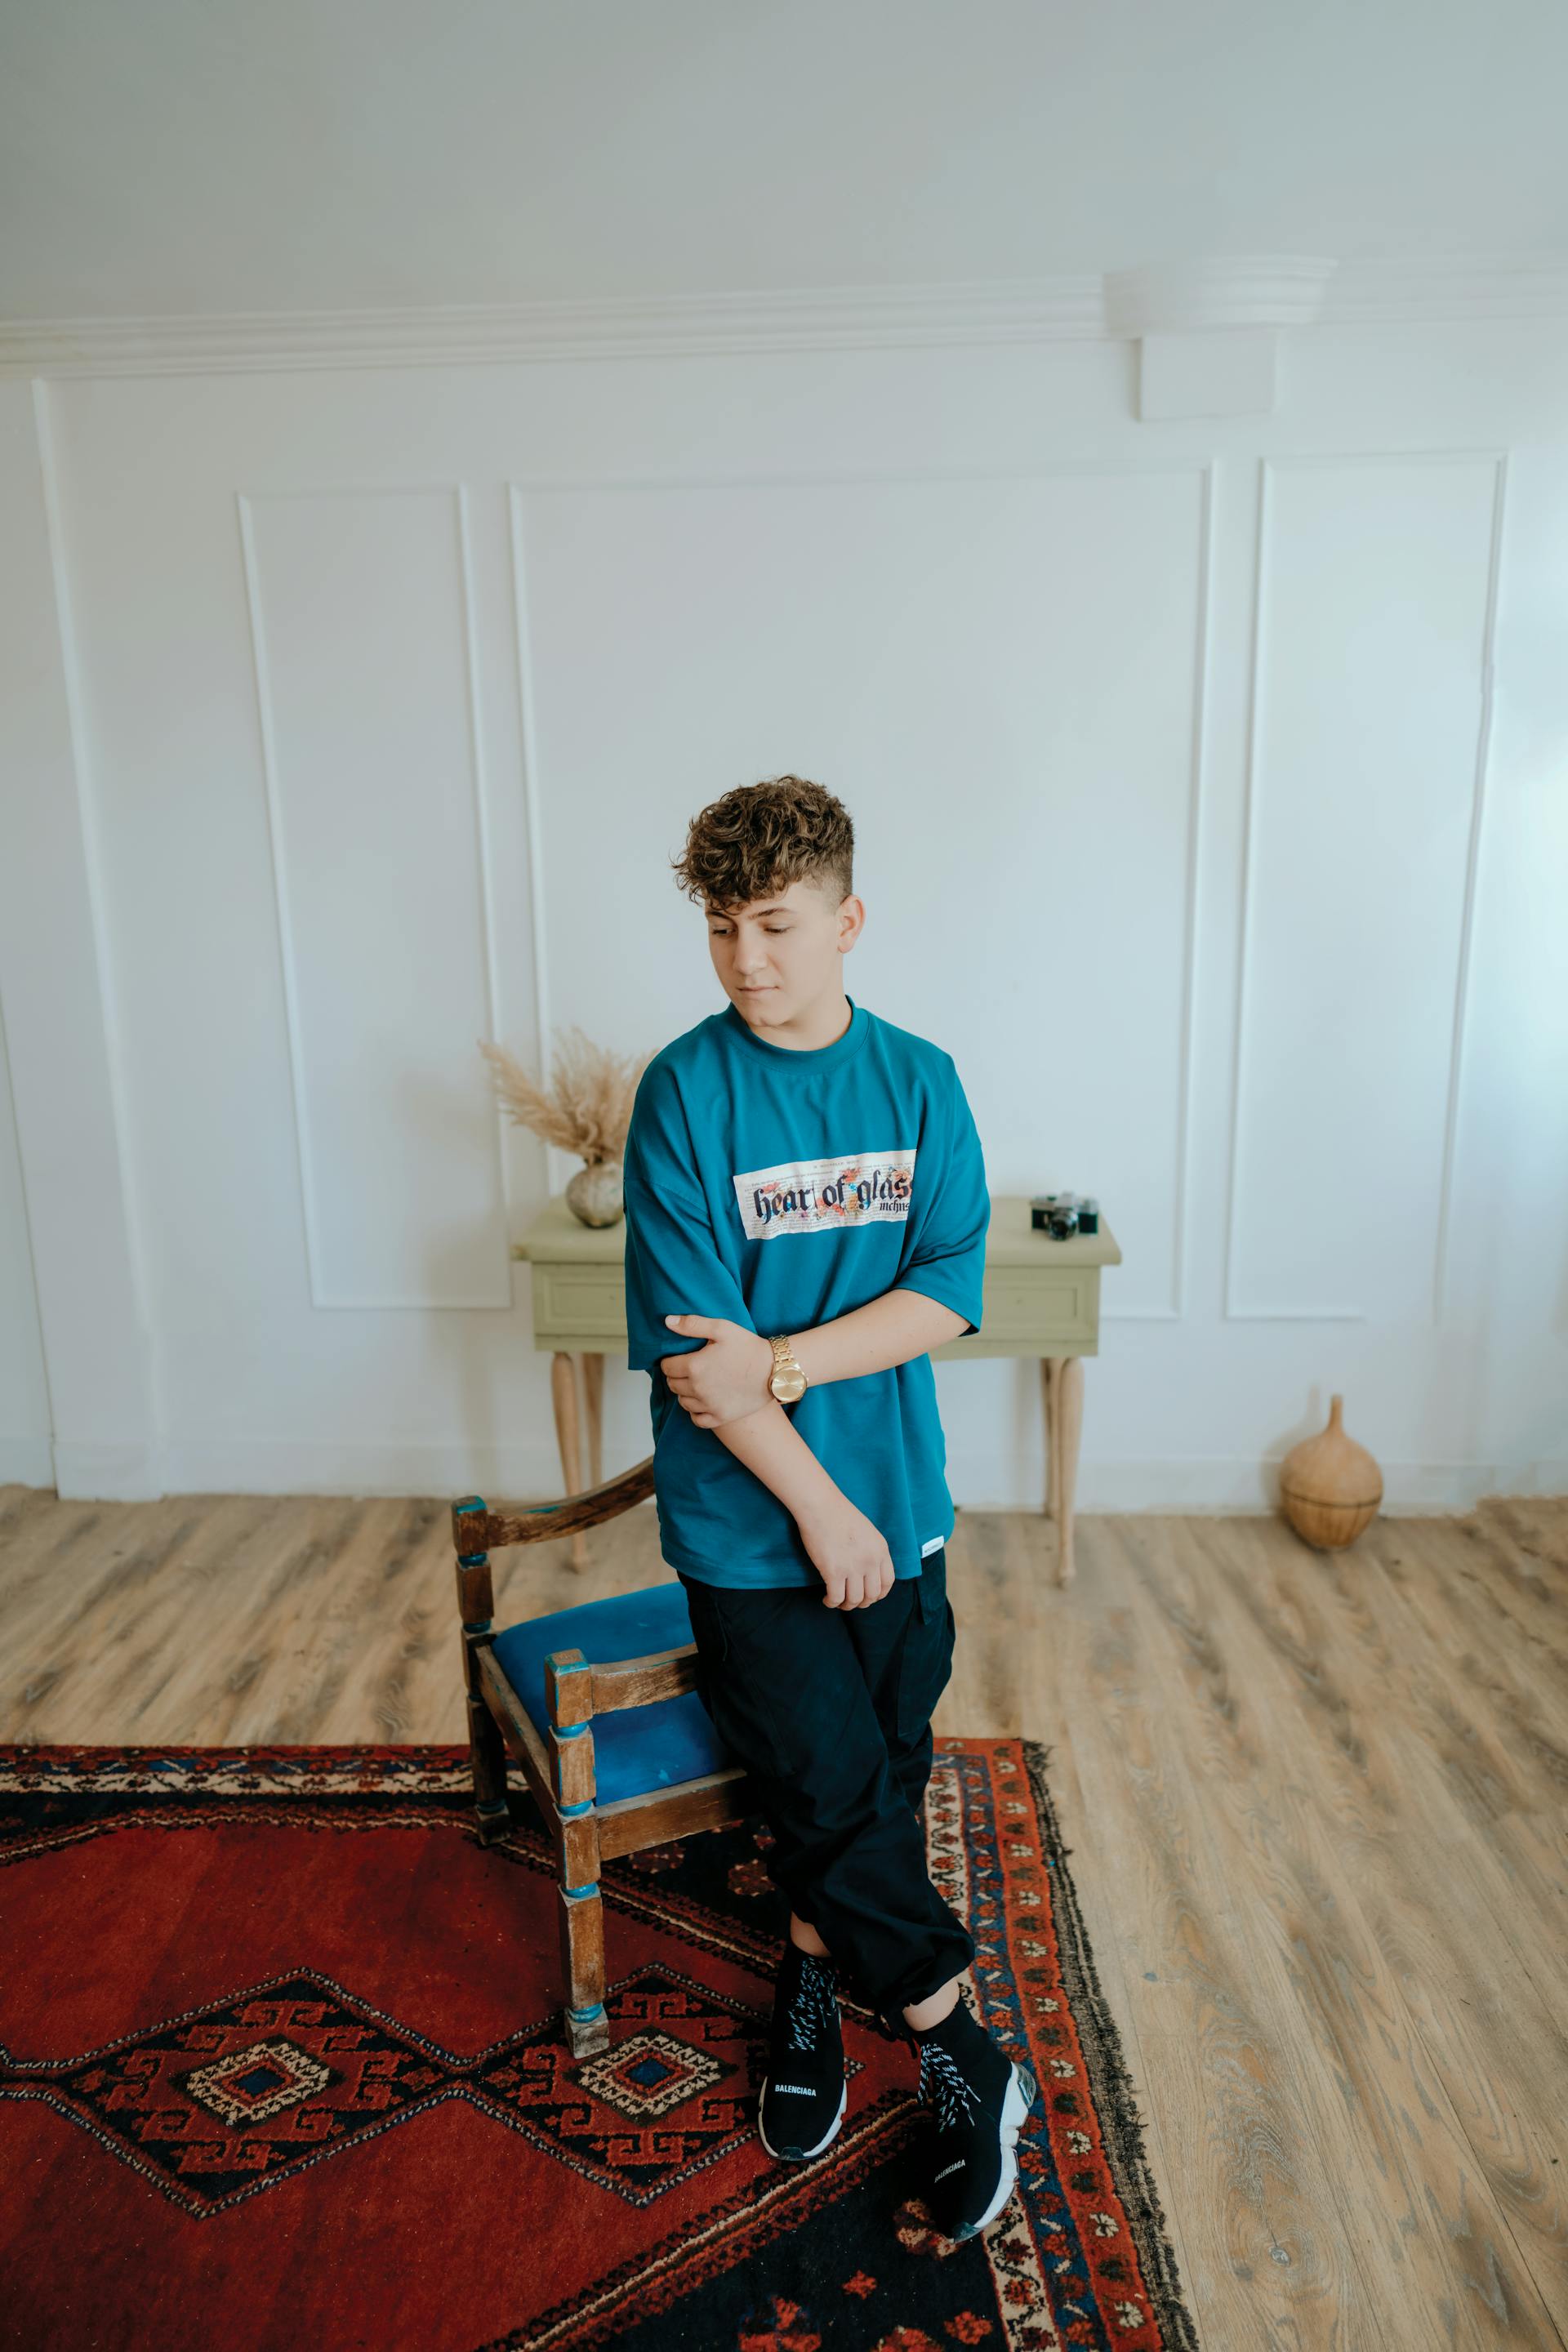 A teenage boy leaning against a chair | Source: Pexels